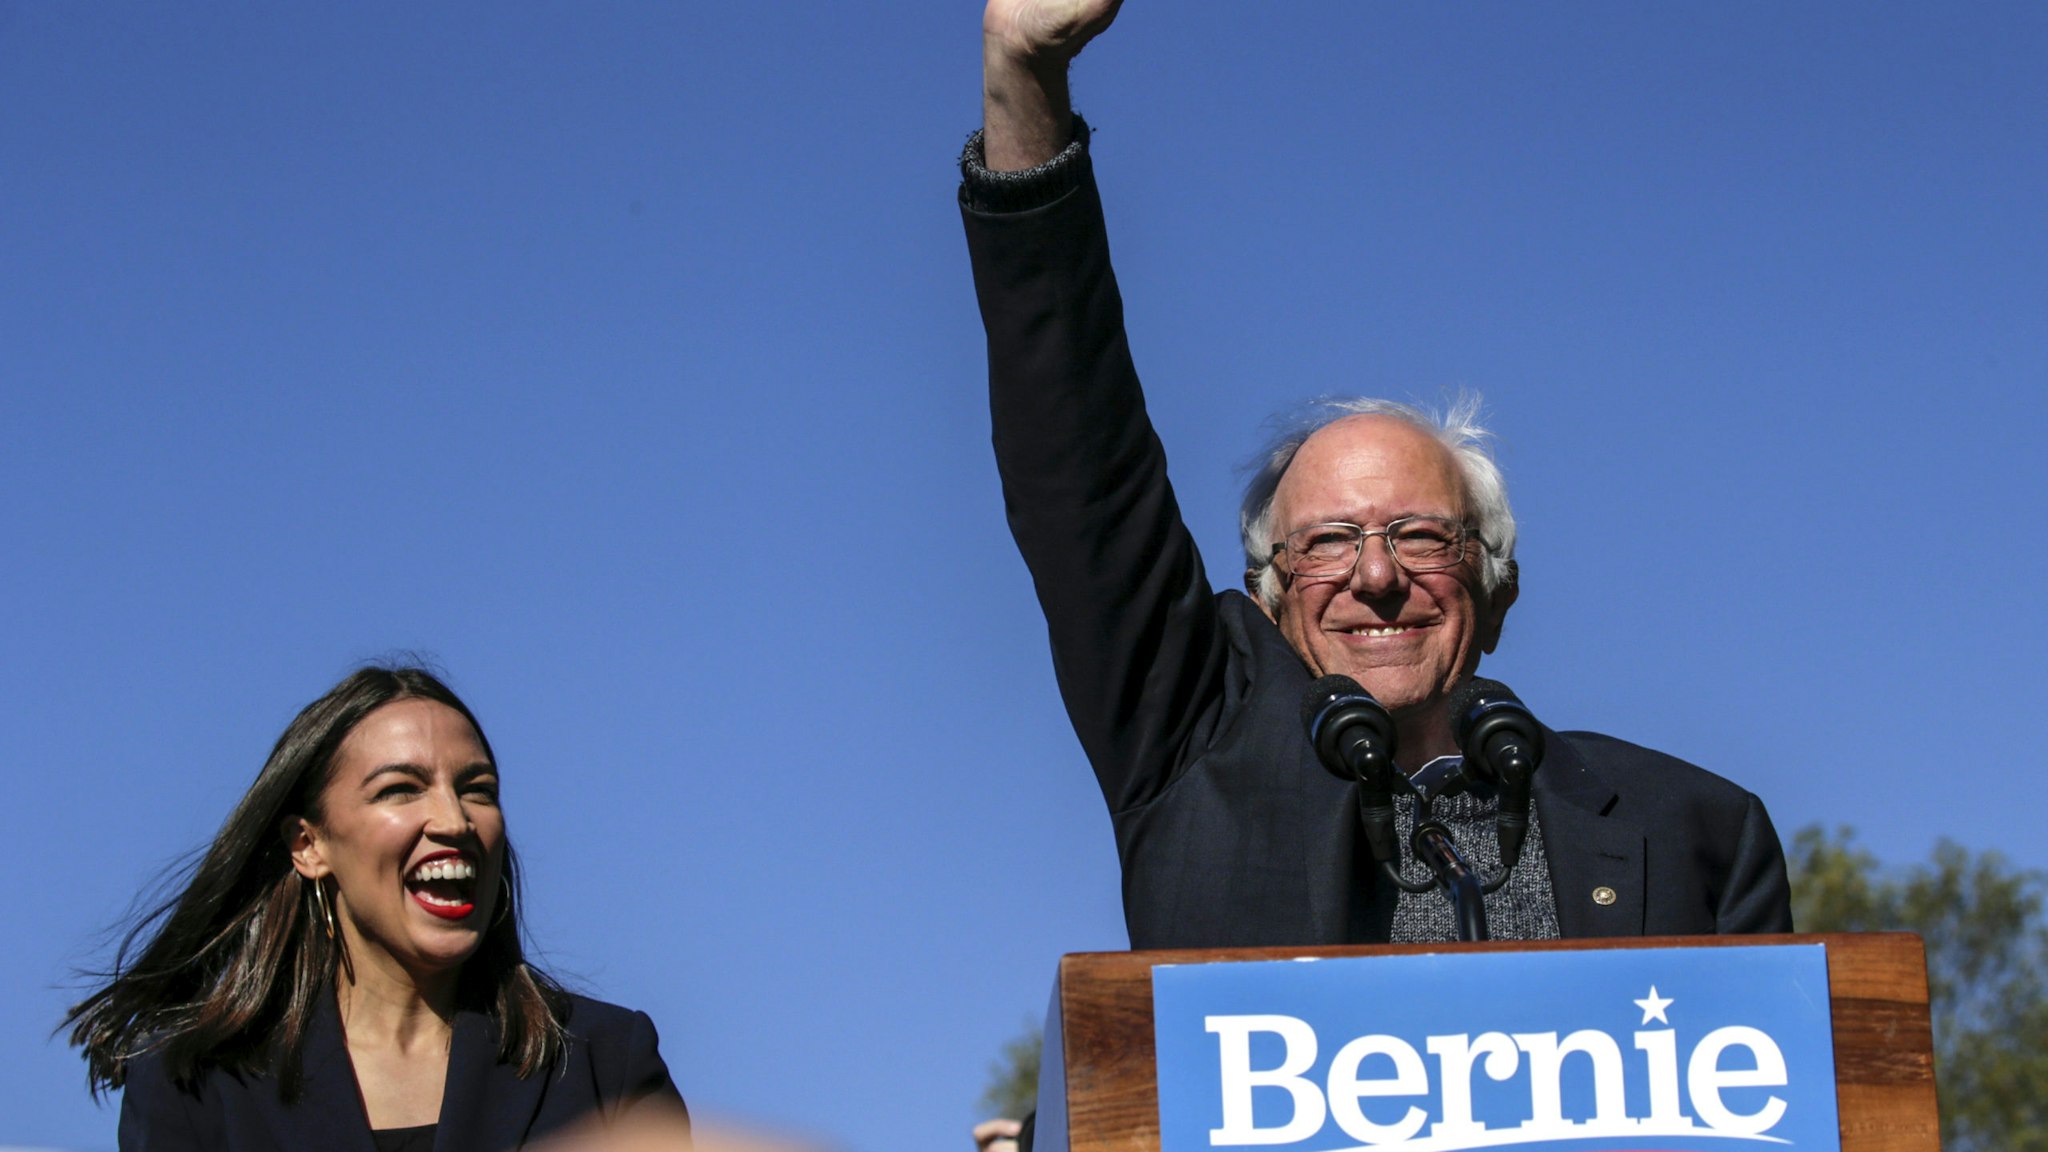 NEW YORK, NY - OCTOBER 19: Democratic presidential candidate, Sen. Bernie Sanders (I-VT) waves with Rep. Alexandria Ocasio-Cortez (D-NY) as she endorses him during his speech at a campaign rally in Queensbridge Park on October 19, 2019 in the Queens borough of New York City. This is Sanders' first rally since he paused his campaign for the nomination due to health problems.